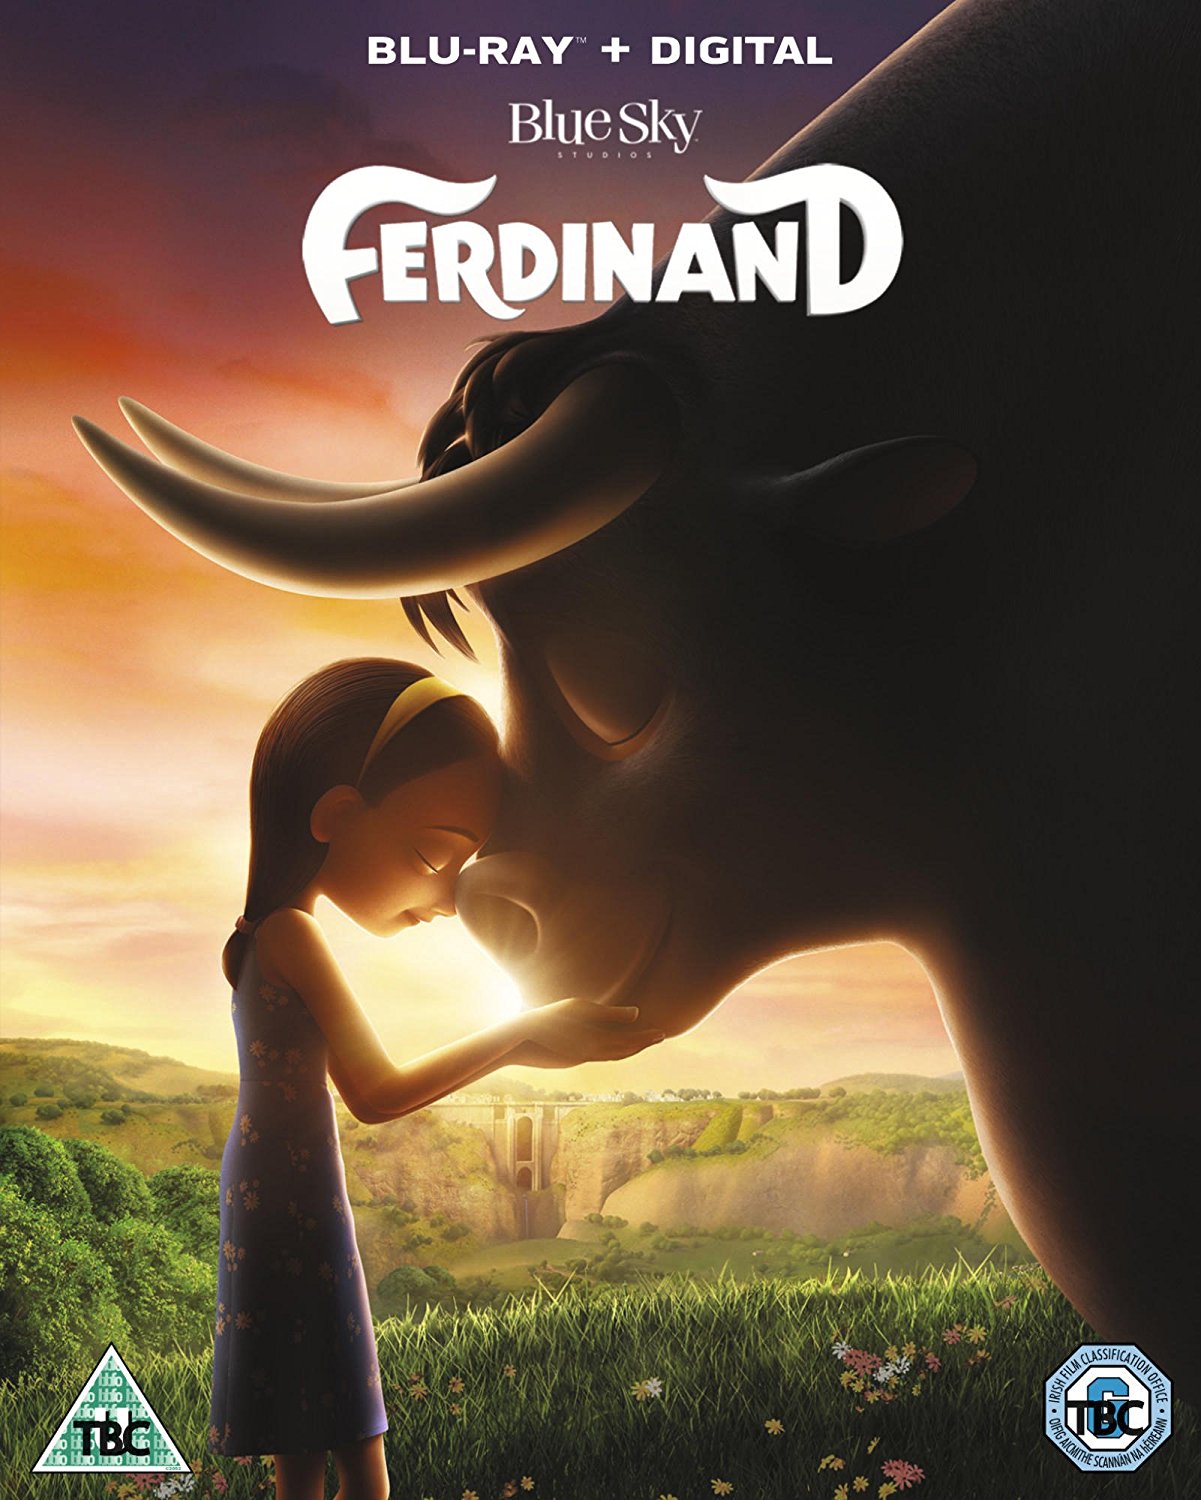 Uk Ferdinand Co Starring David Tennant Released On Dvd Blu Ray In April - roblox animation movie dvd